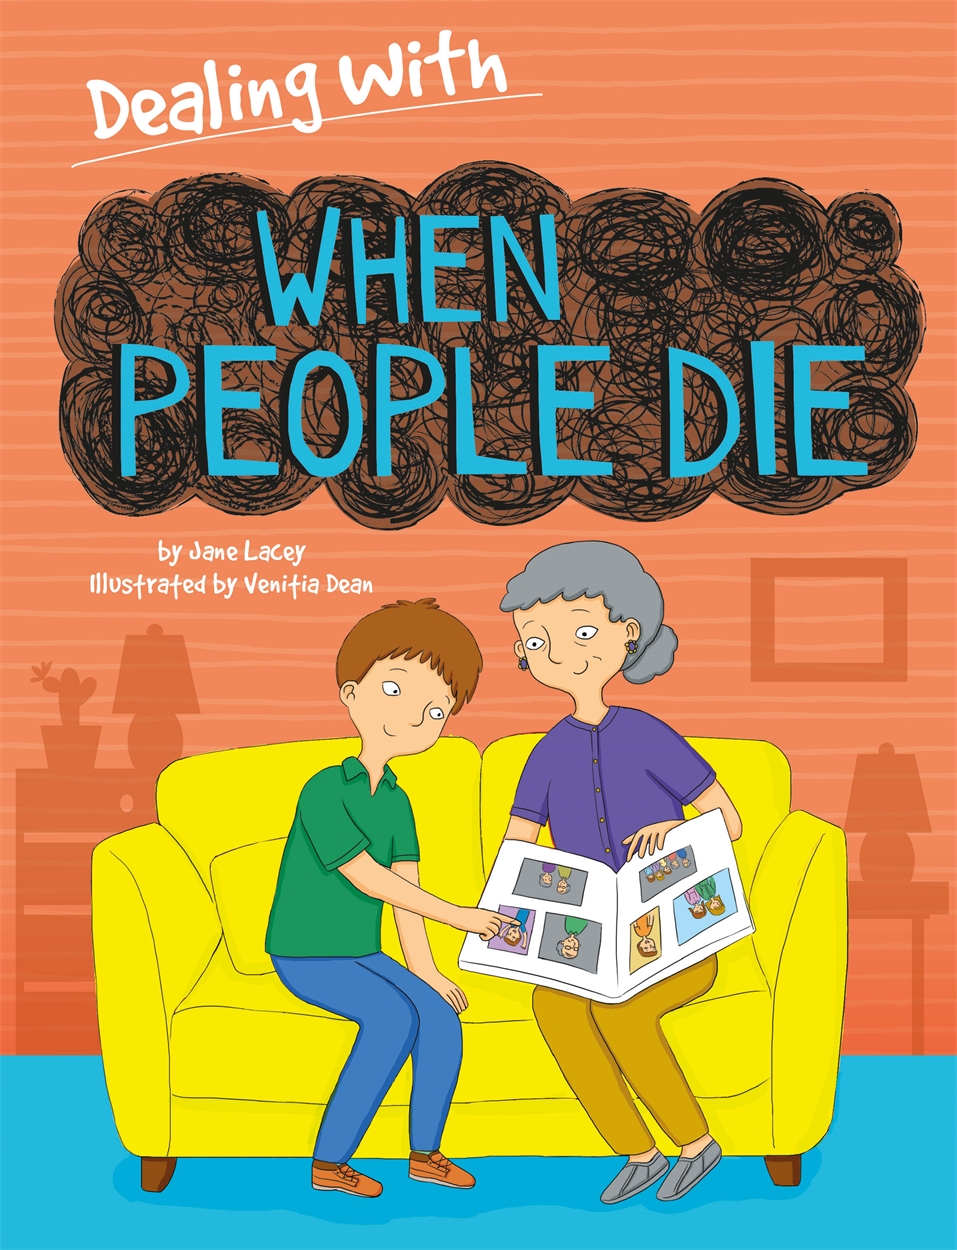 Dealing With...: When People Die by Jane Lacey | Hachette UK